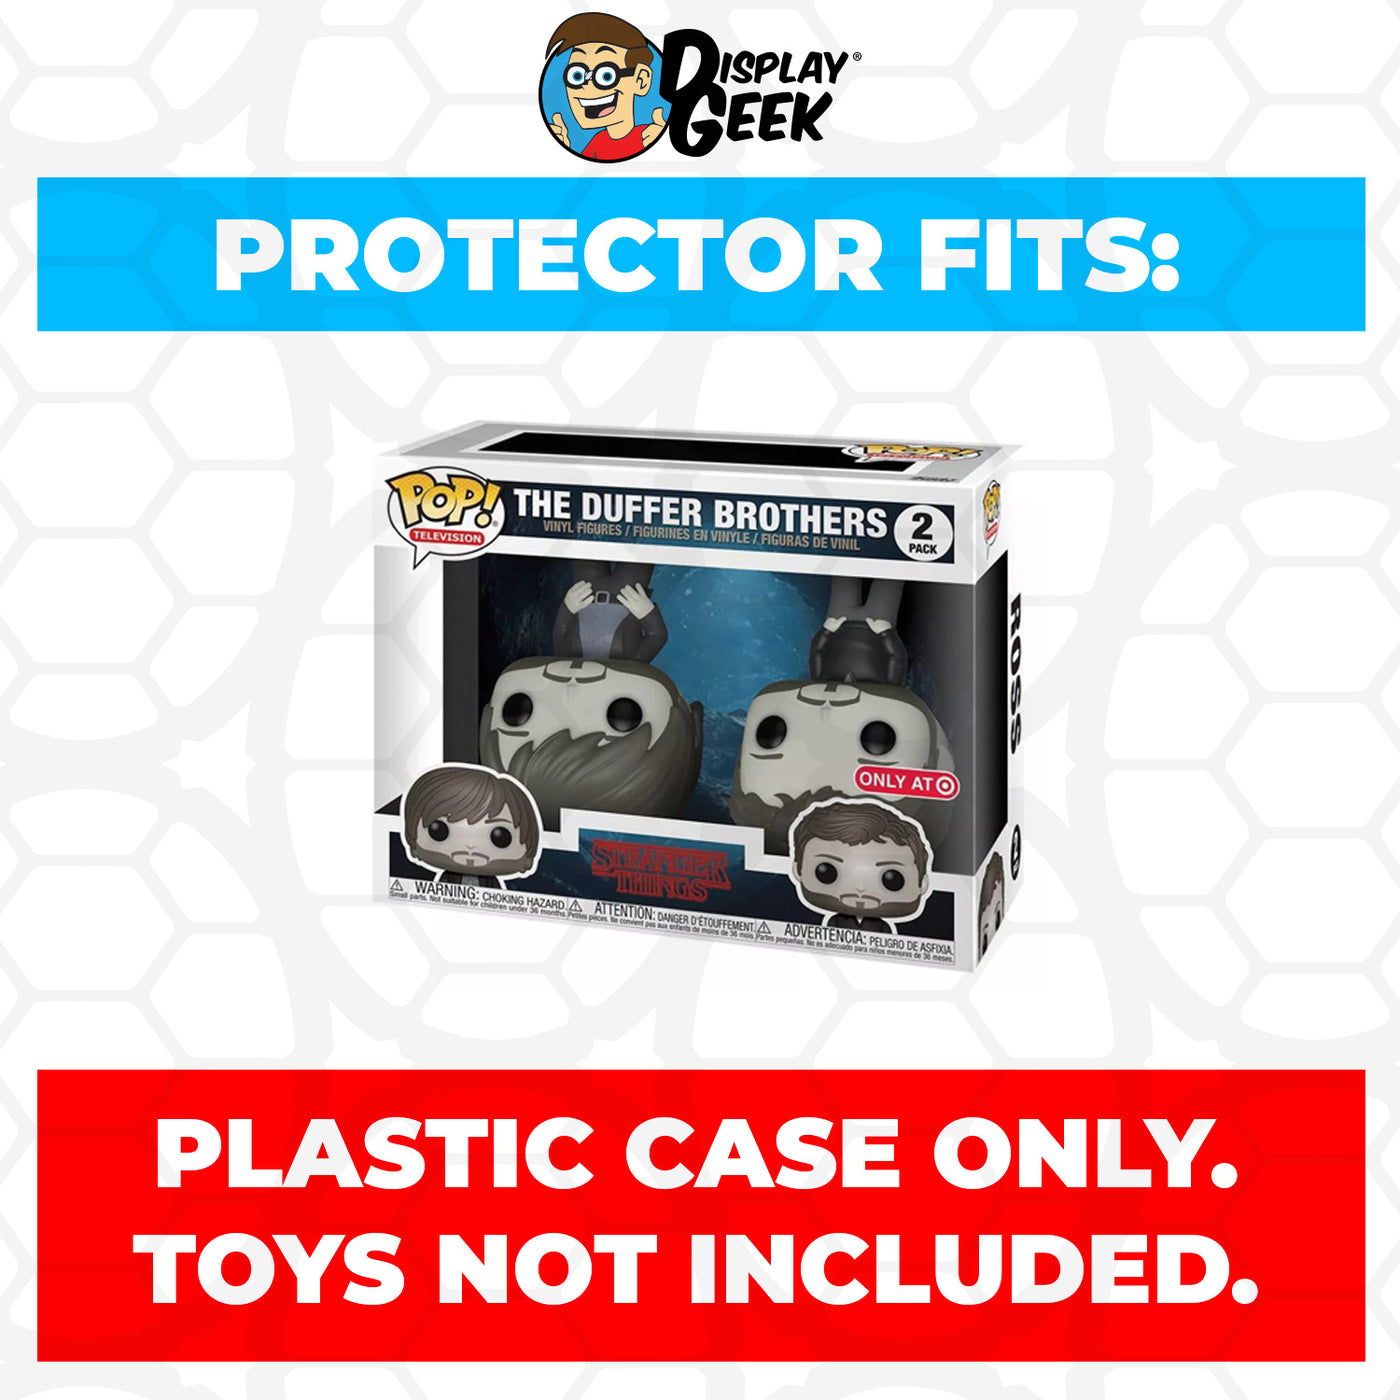 Pop Protector for 2 Pack The Duffer Brothers Upside Down Funko Pop on The Protector Guide App by Display Geek